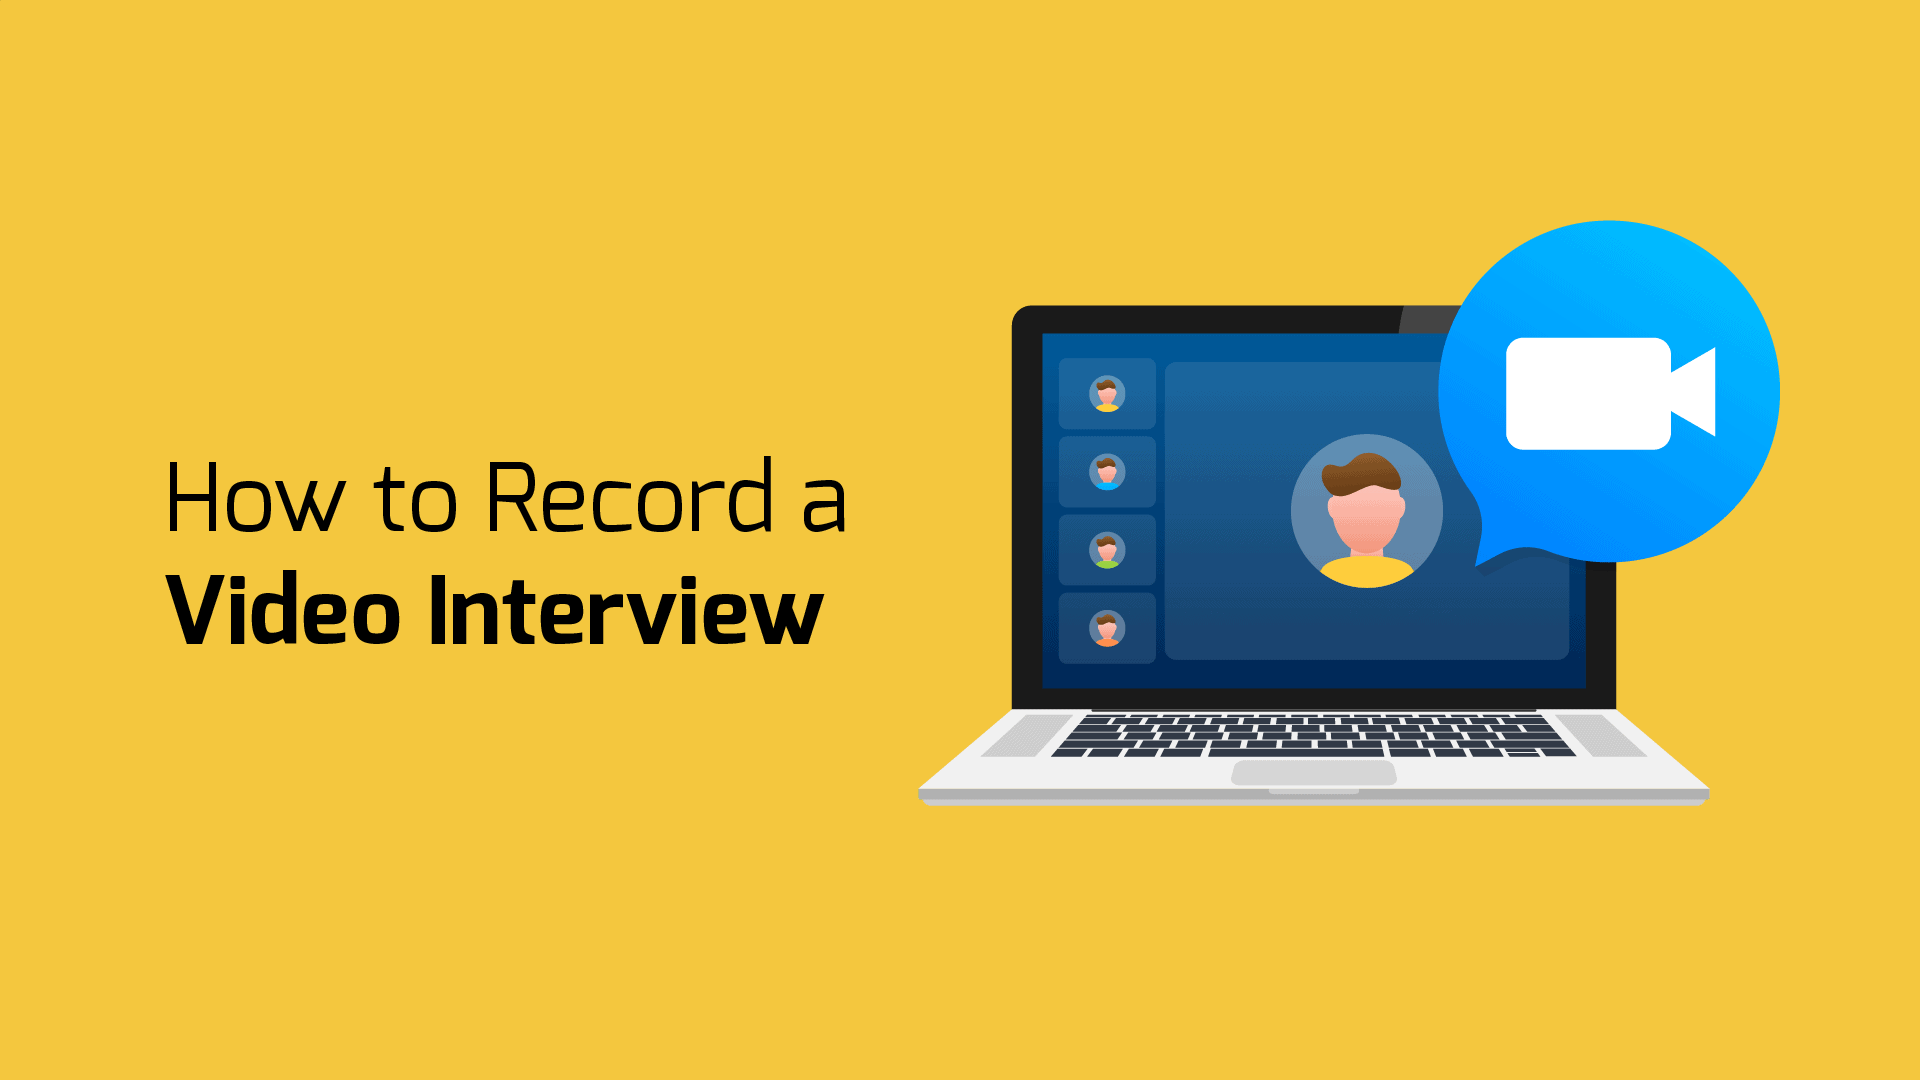 Tips for recording successful video interviews